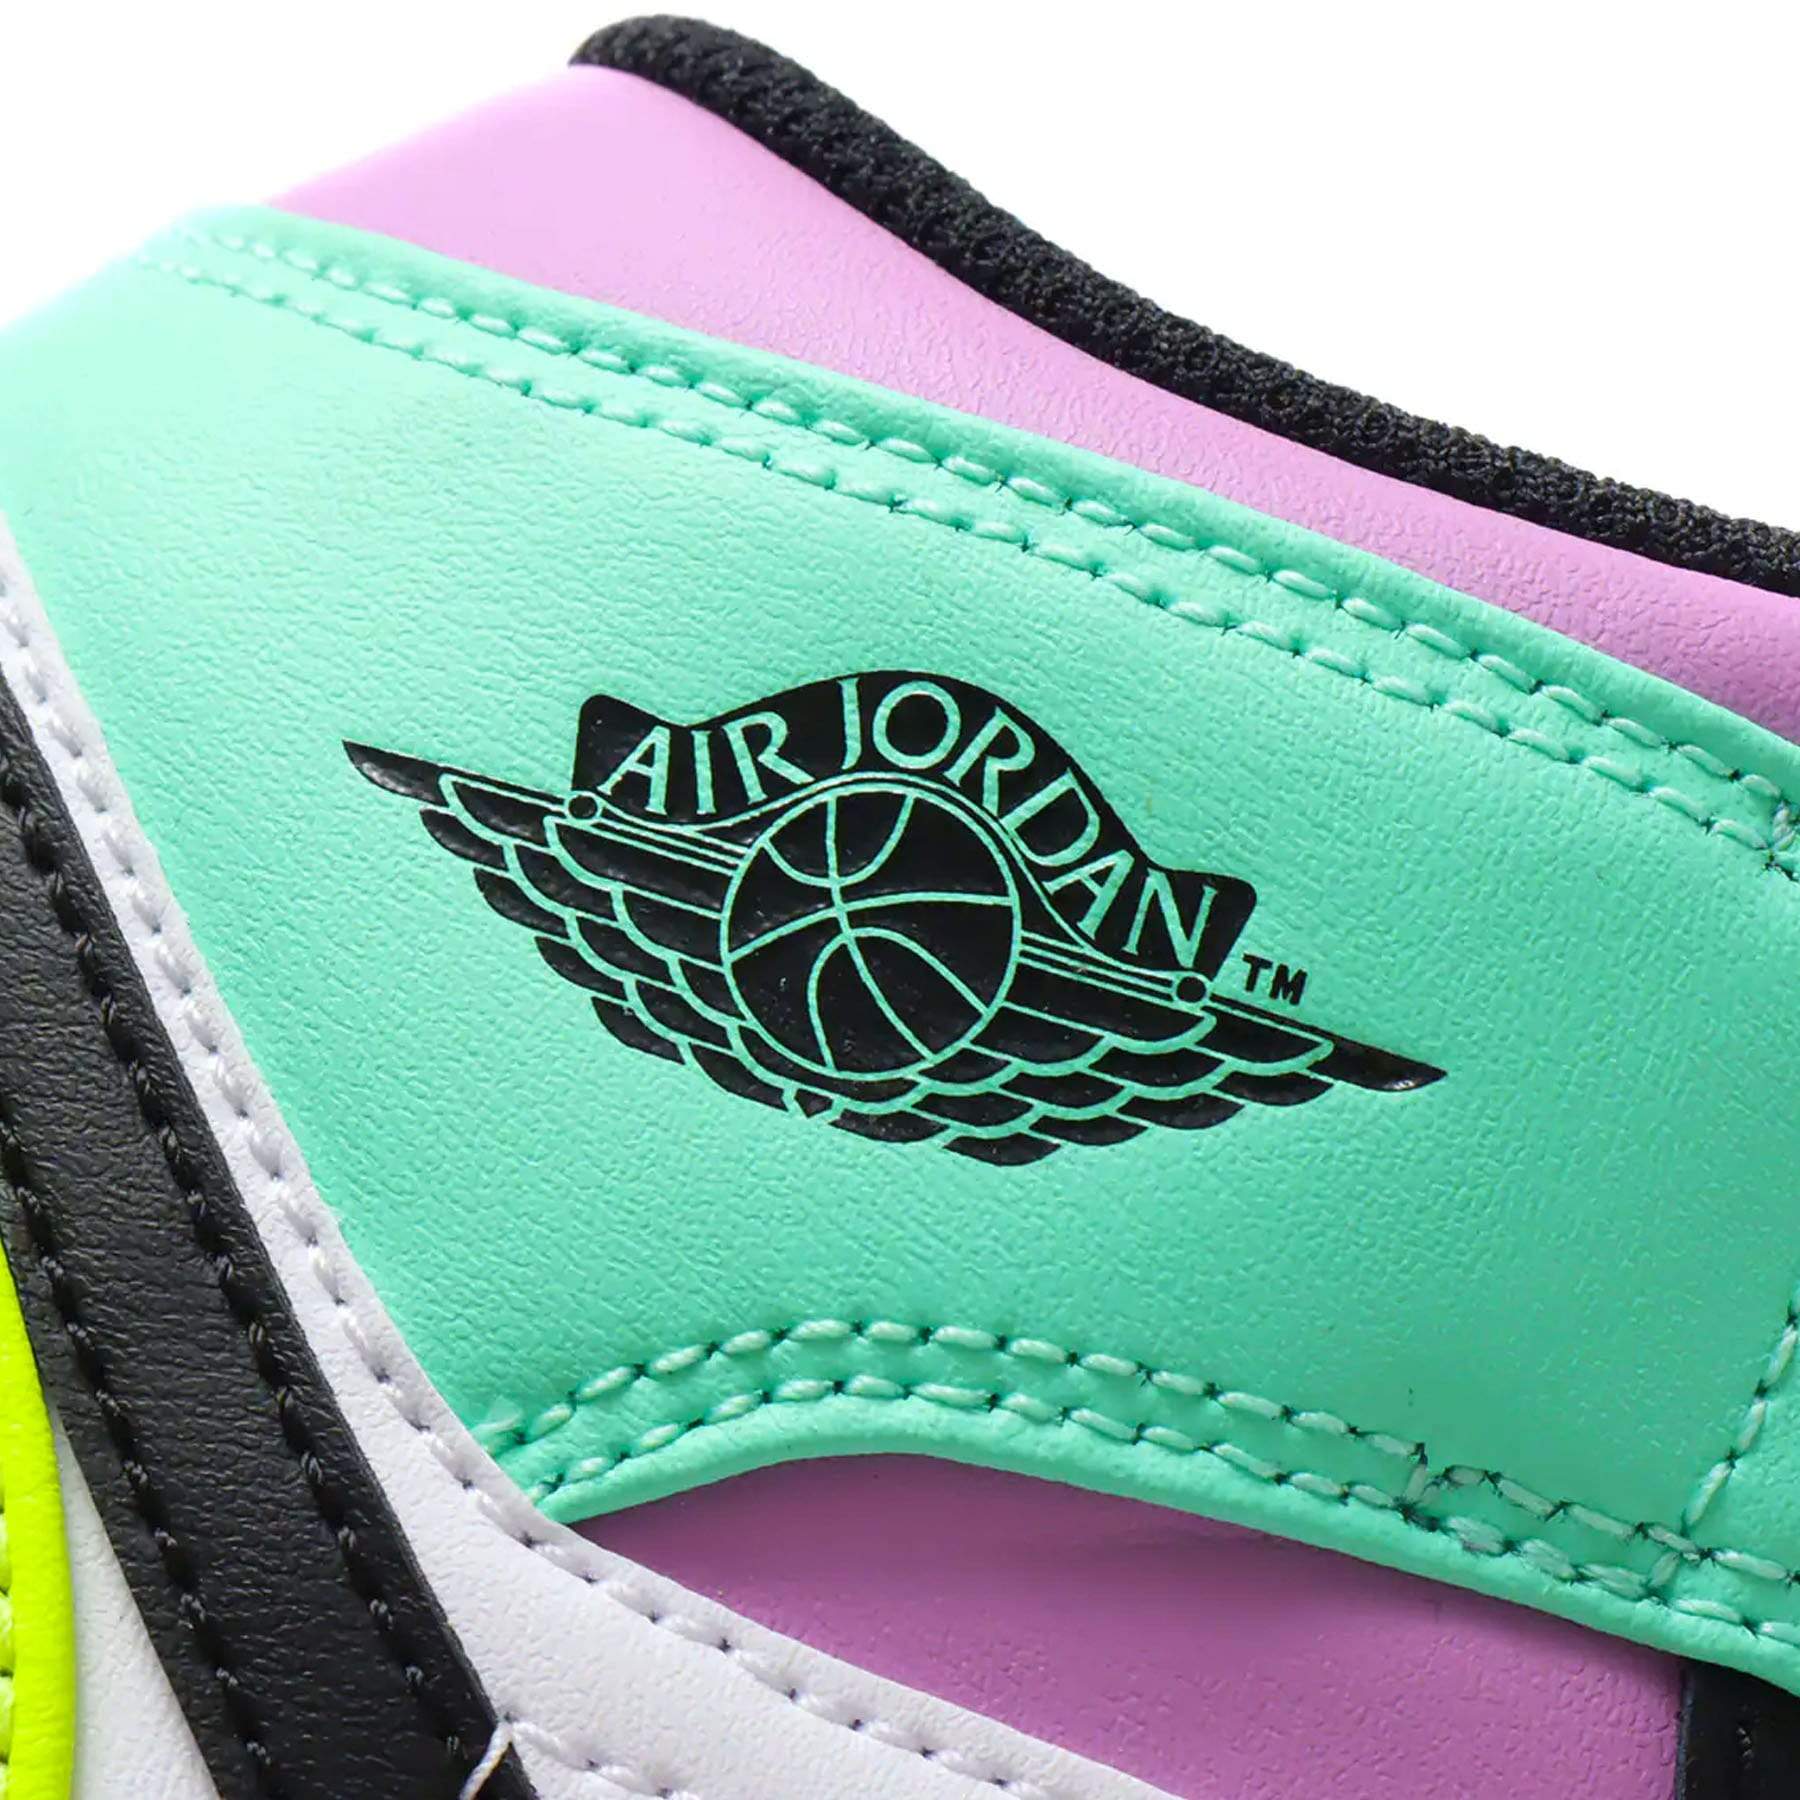 Double Boxed  279.99 Nike Air Jordan 1 Mid Pastel Double Boxed